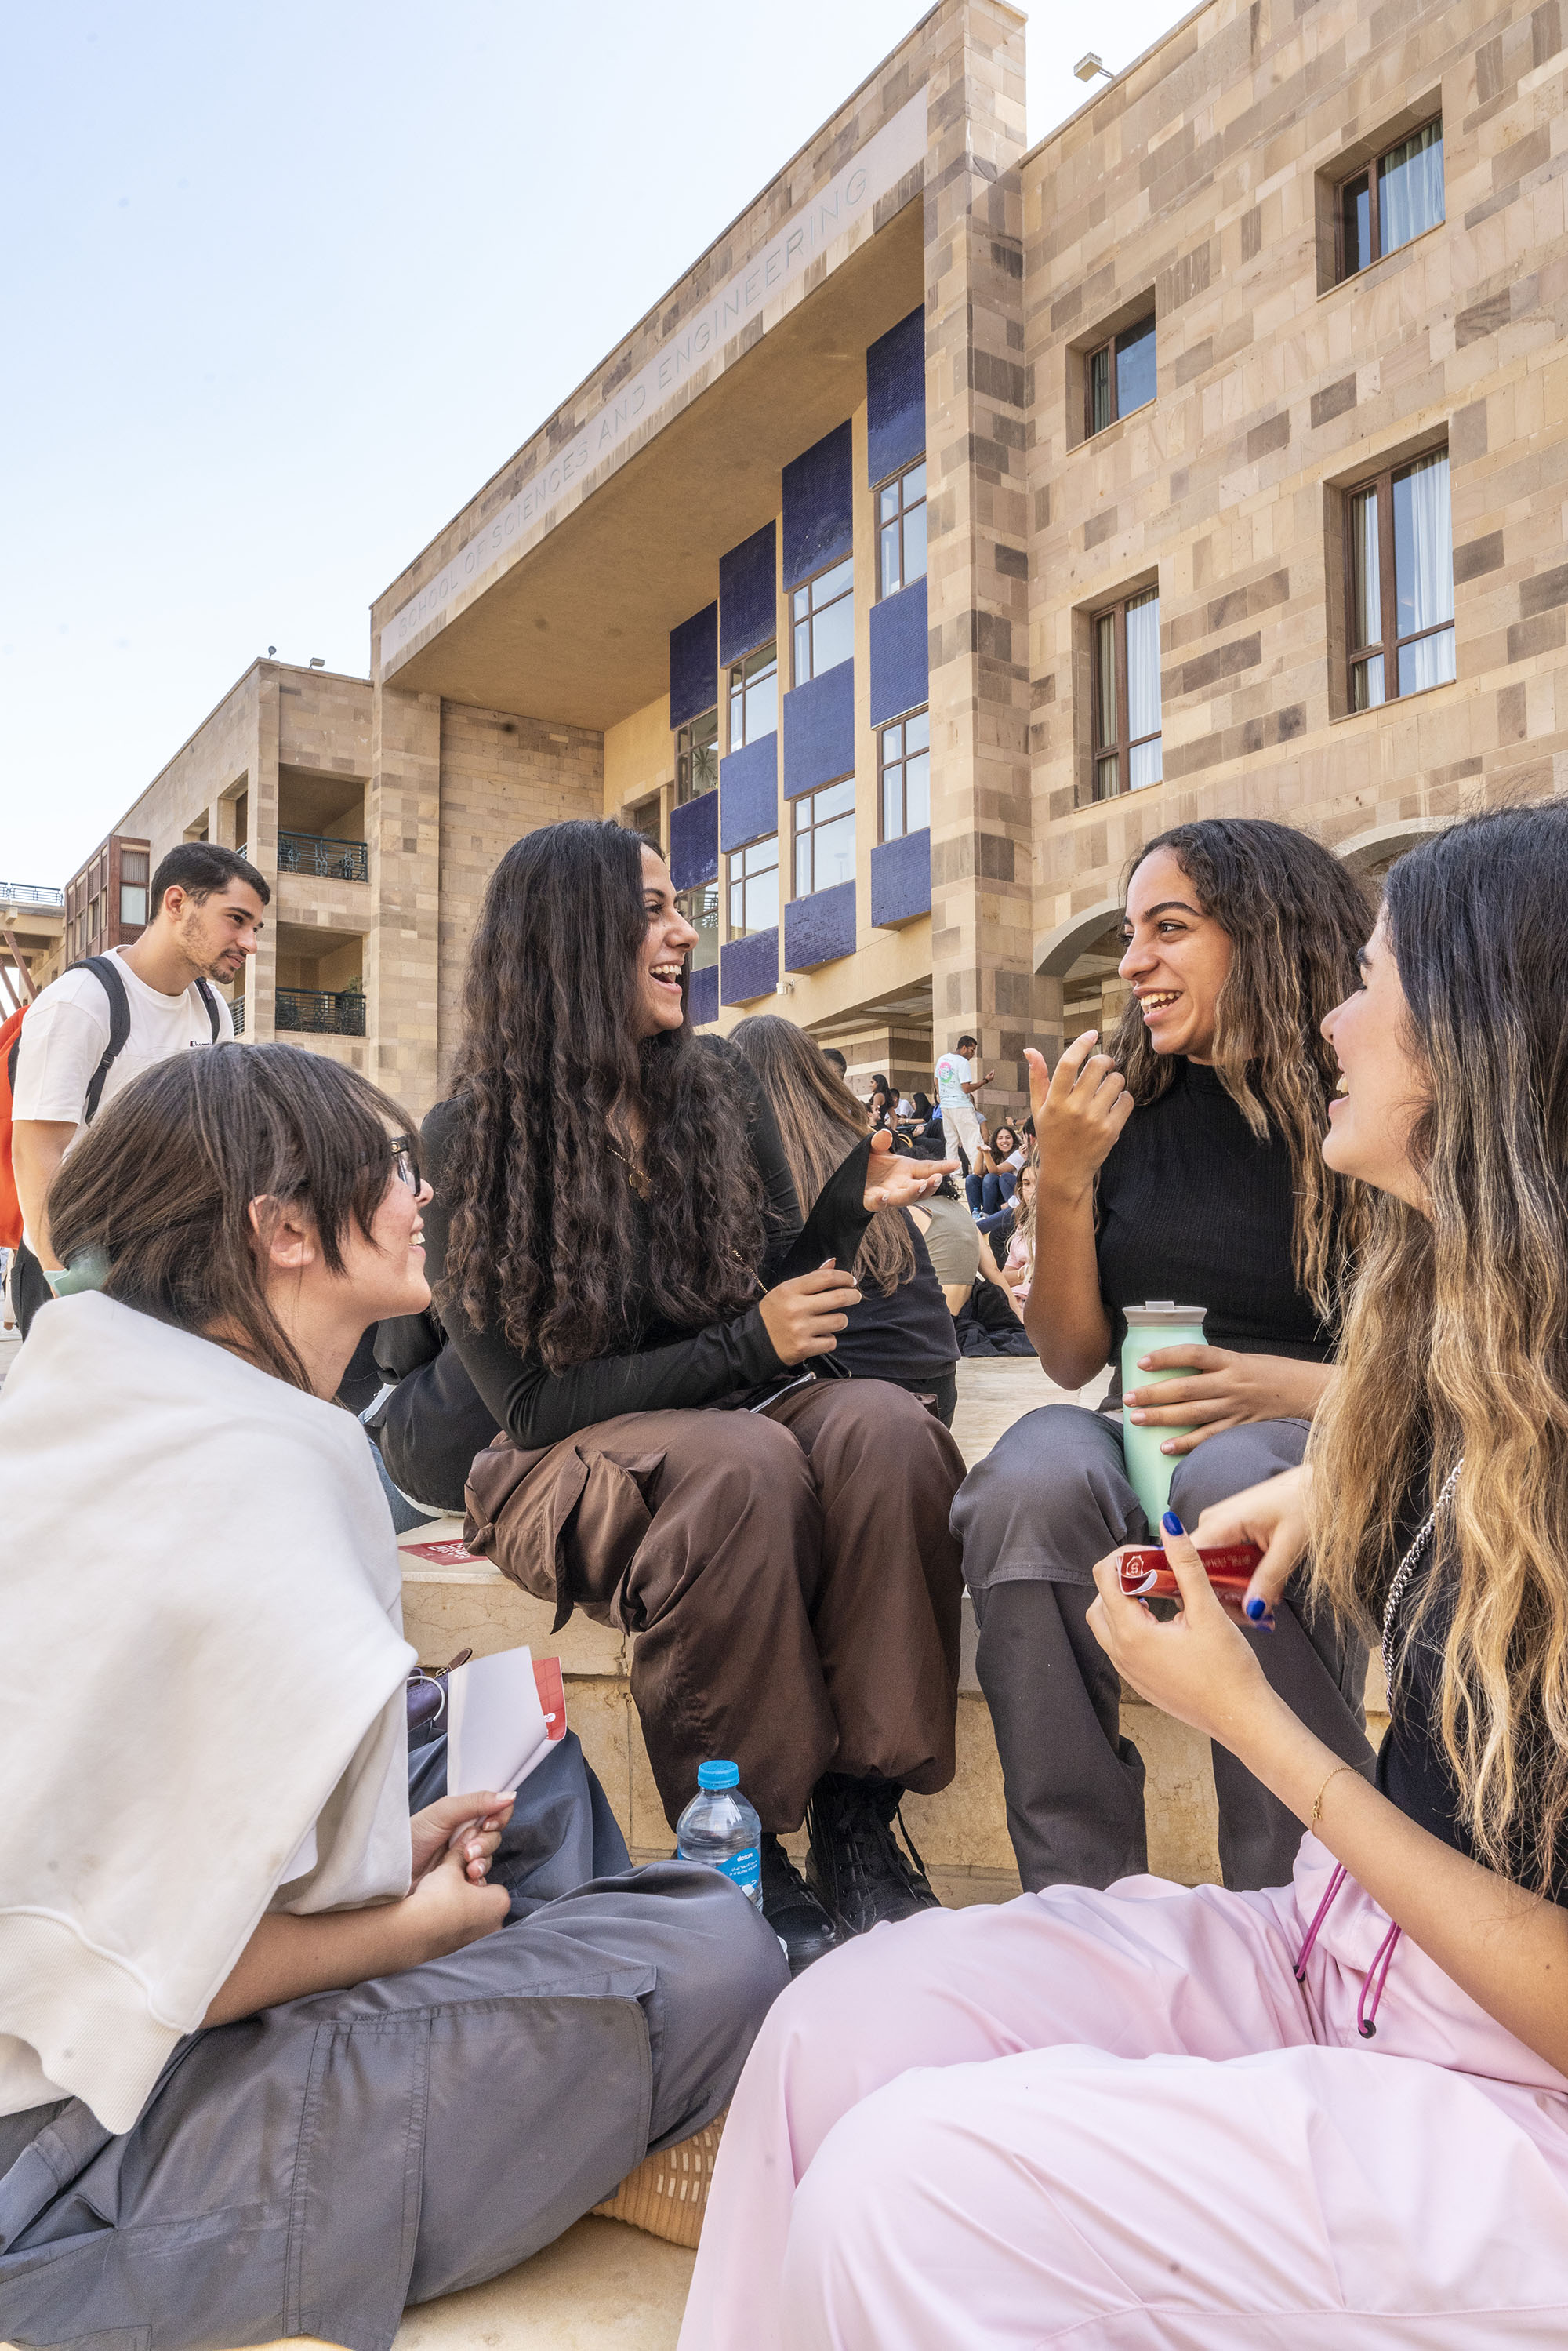 Students sitting in stairs under a building outdoors laughing 